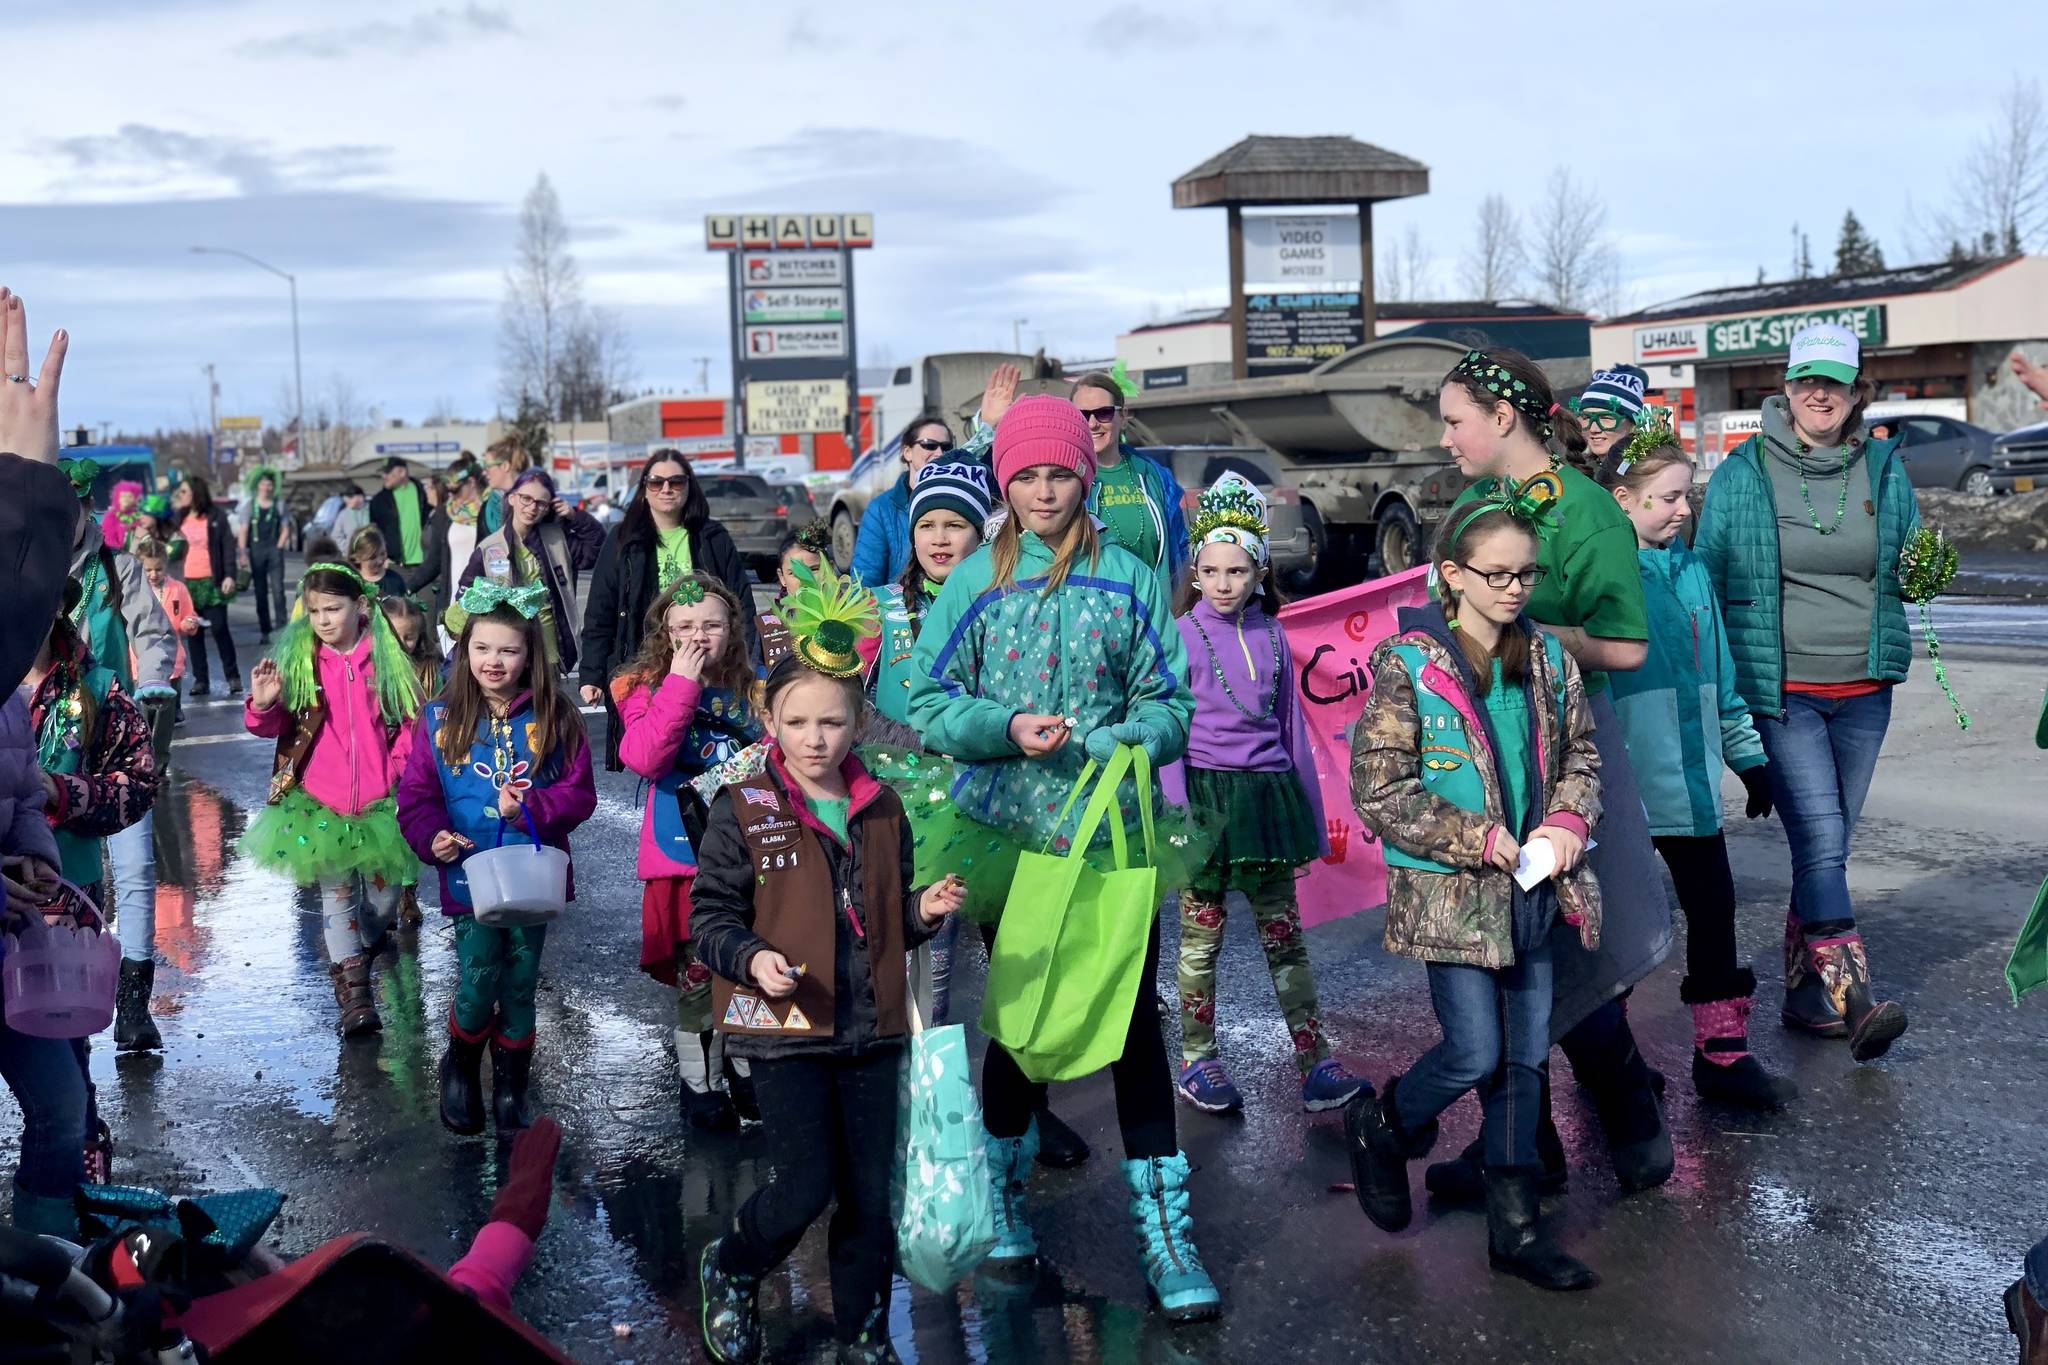 Girl Scout Troop 210 came to represent themselves in Soldotna’s St. Patrick’s Day Parade on Sunday, March 17, 2019, in Soldotna, Alaska. (Photo by Victoria Petersen/Peninsula Clarion)